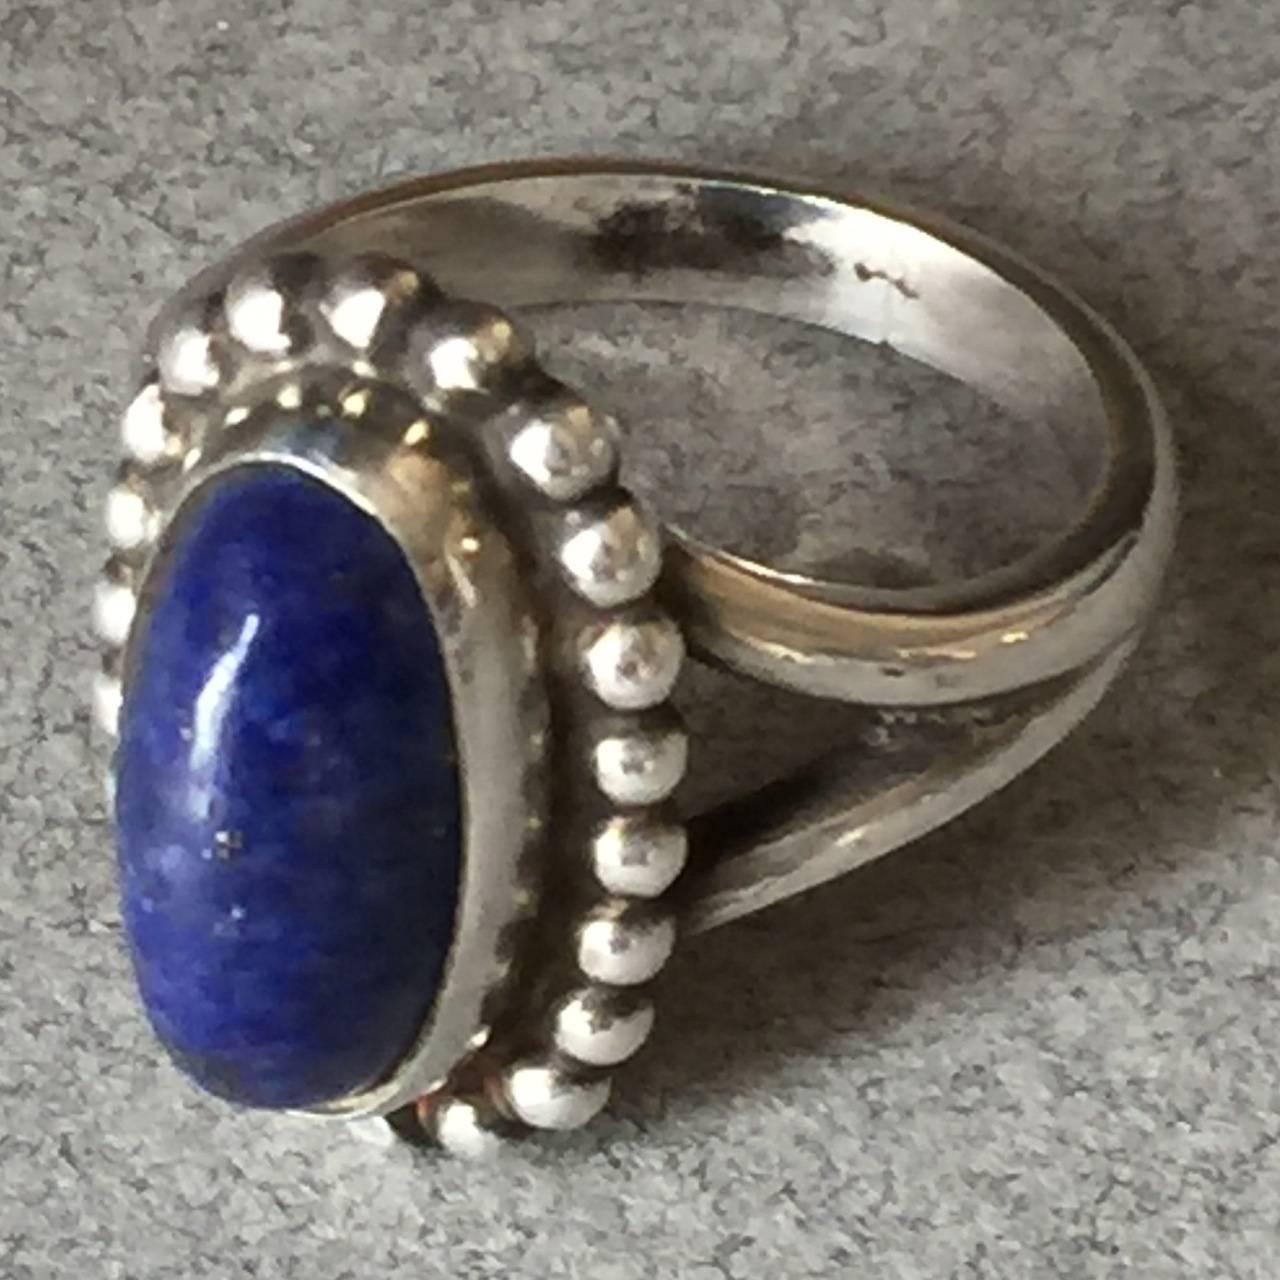 Georg Jensen Sterling Silver Ring No. 9 with Lapis Lazuli

Wonderful sterling silver ring that features a vibrant blue Lapis Lazuli gemstone. This is a unique ring in excellent condition.

Complimentary gift box and FREE shipping included.